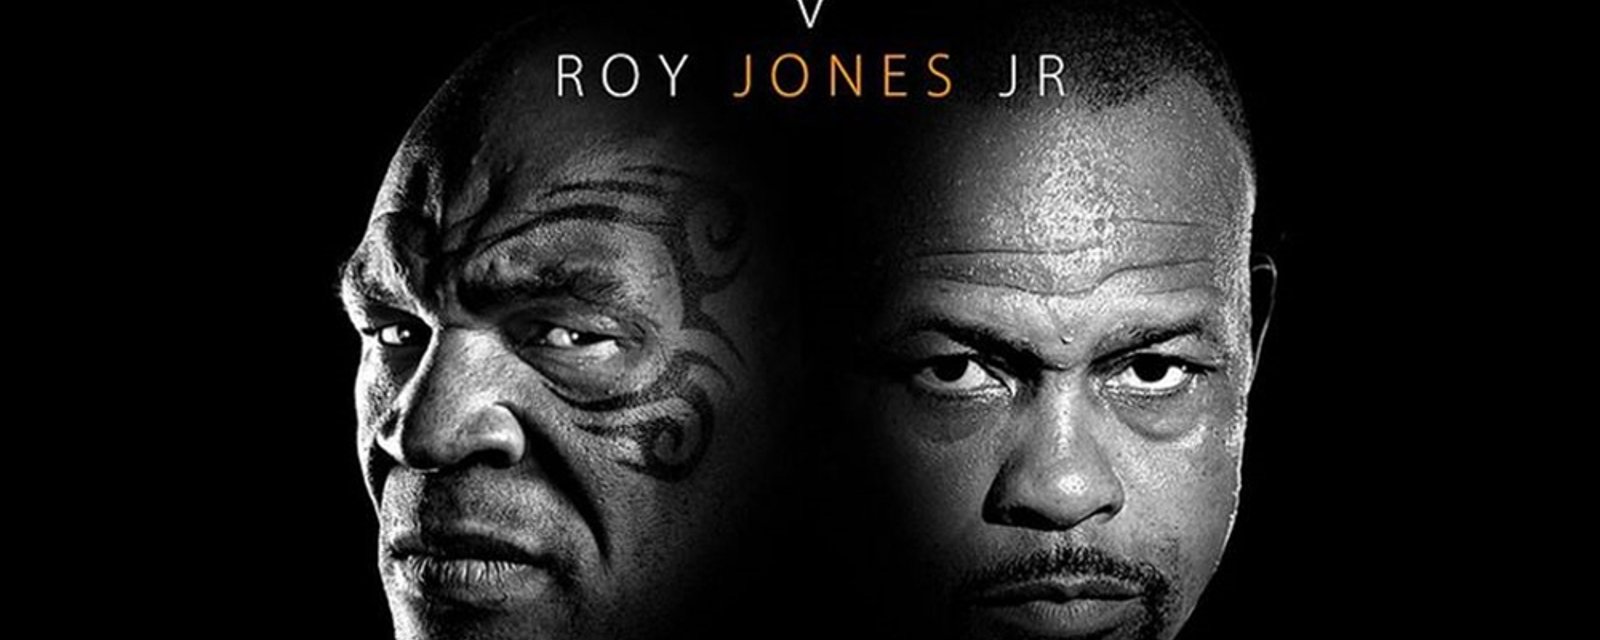 KO's prohibited in new rules for much anticipated Mike Tyson vs Roy Jones Jr fight